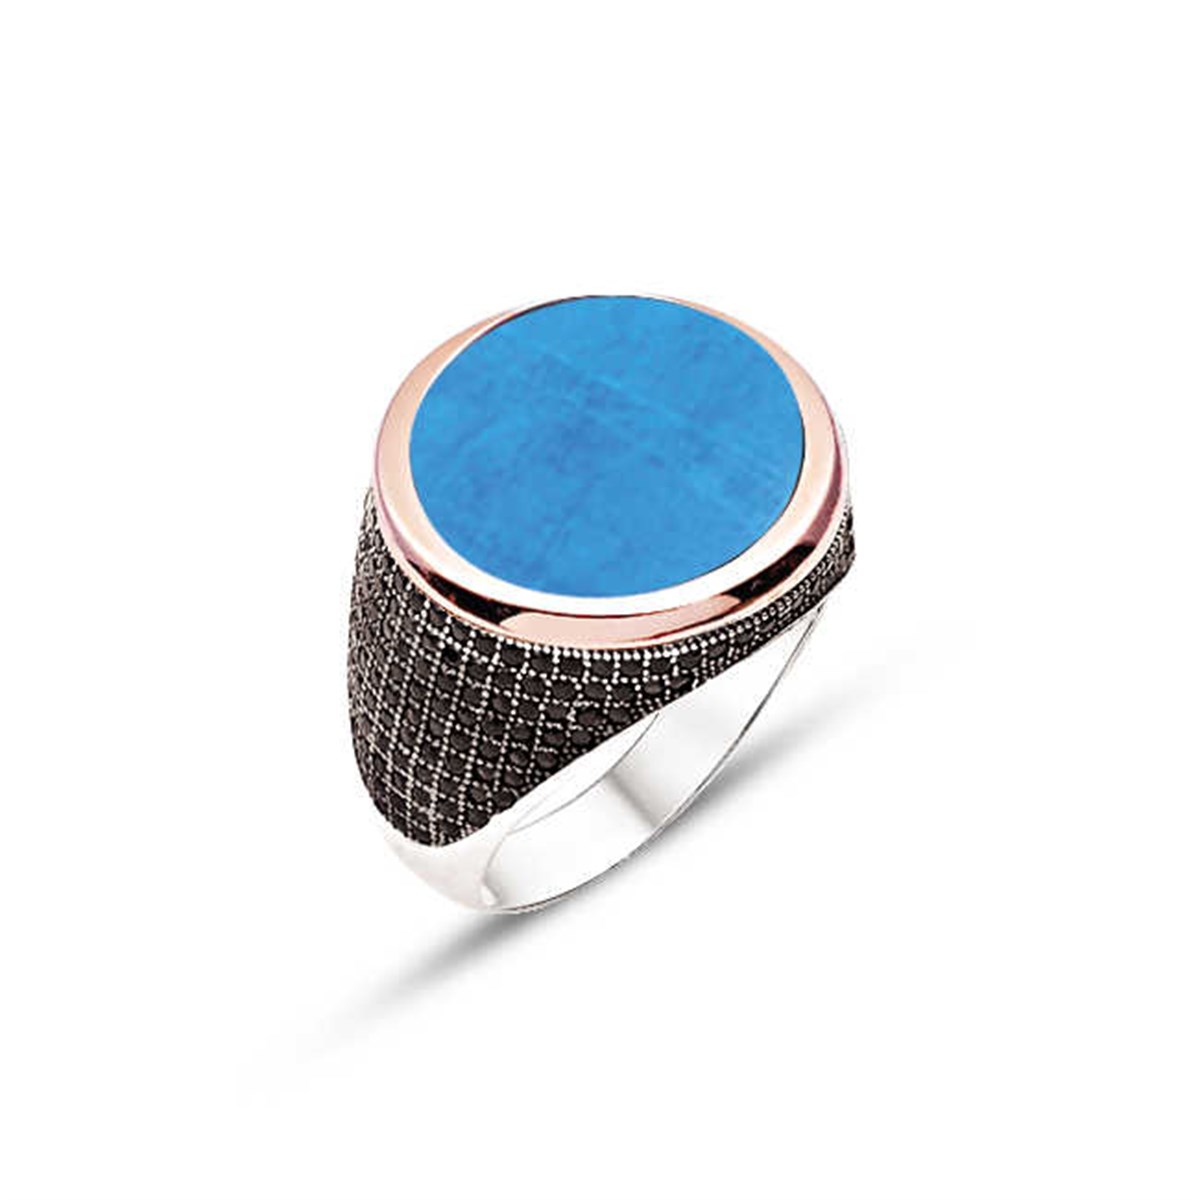 Silver Turquoise Stone Men's Ring